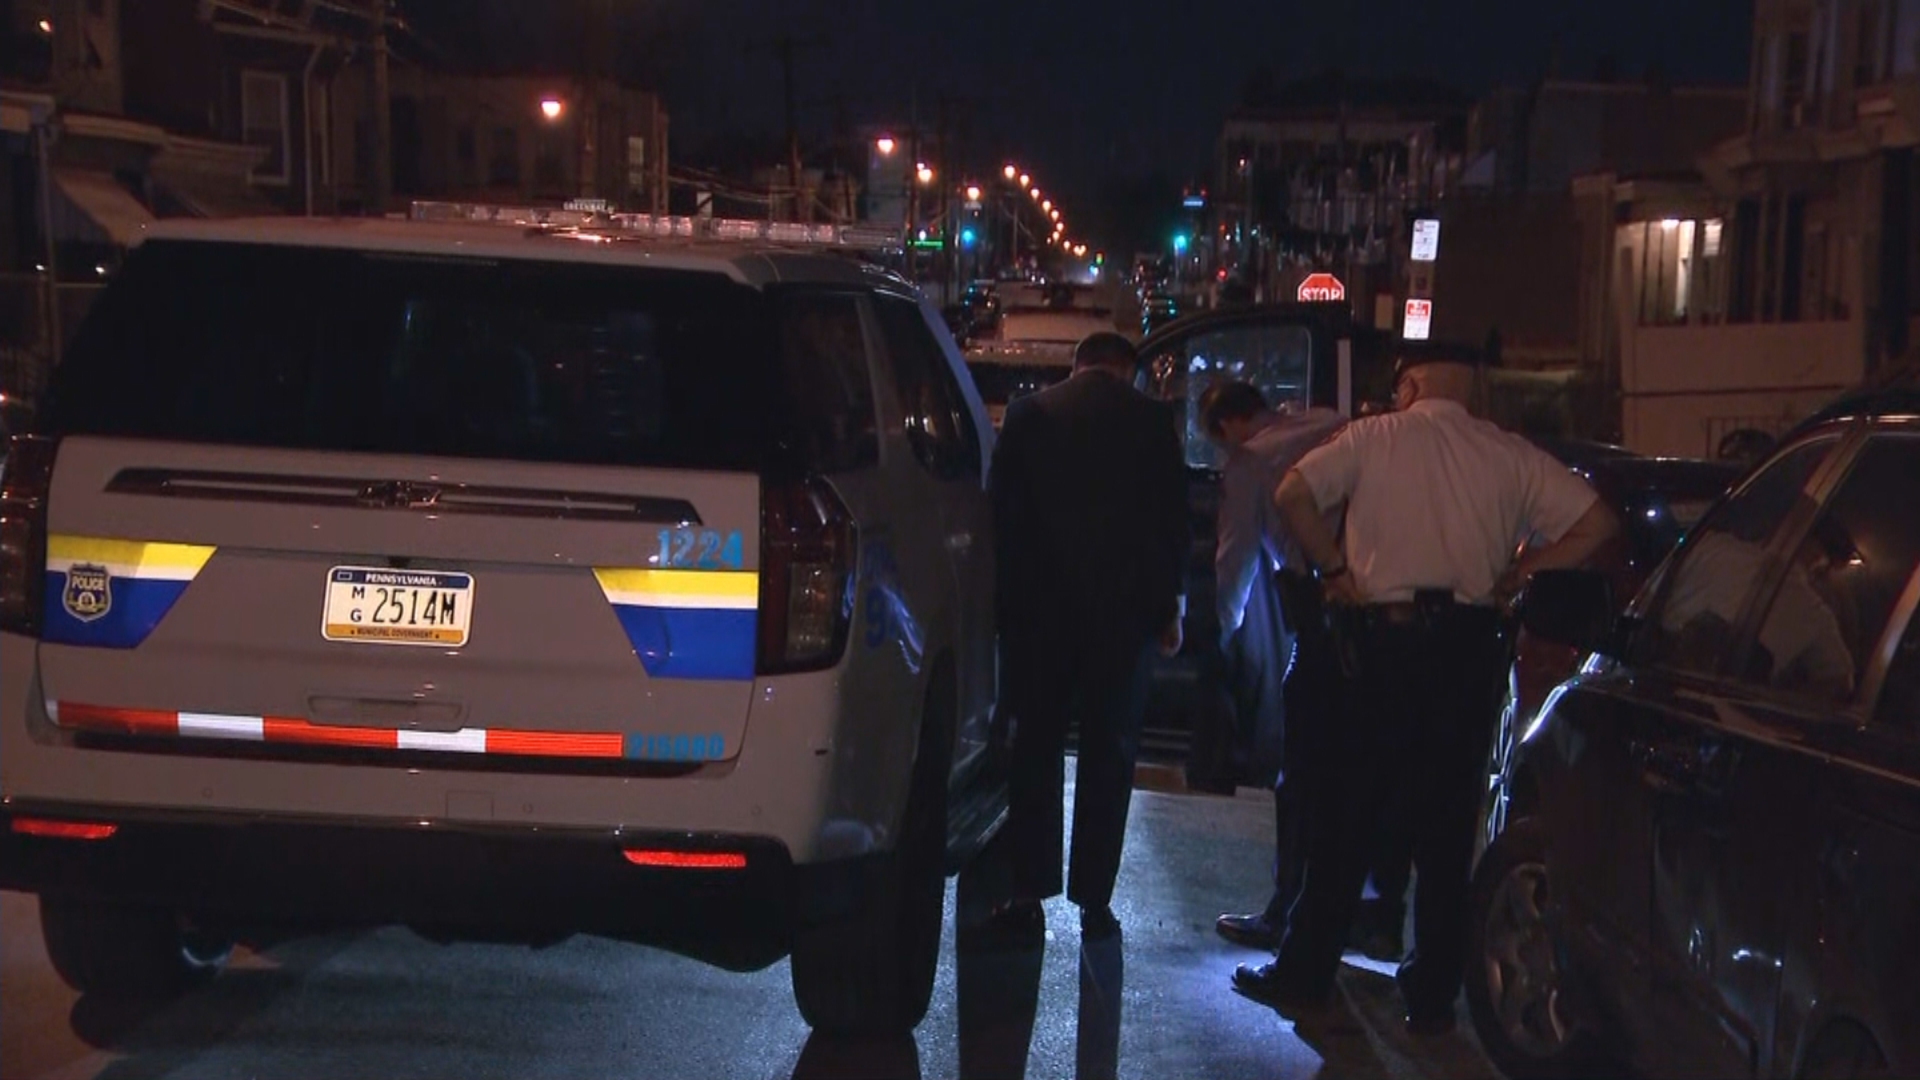 3-Year-Old Boy Among 10 People Shot In 7 Separate Overnight Shootings In Philadelphia: Police